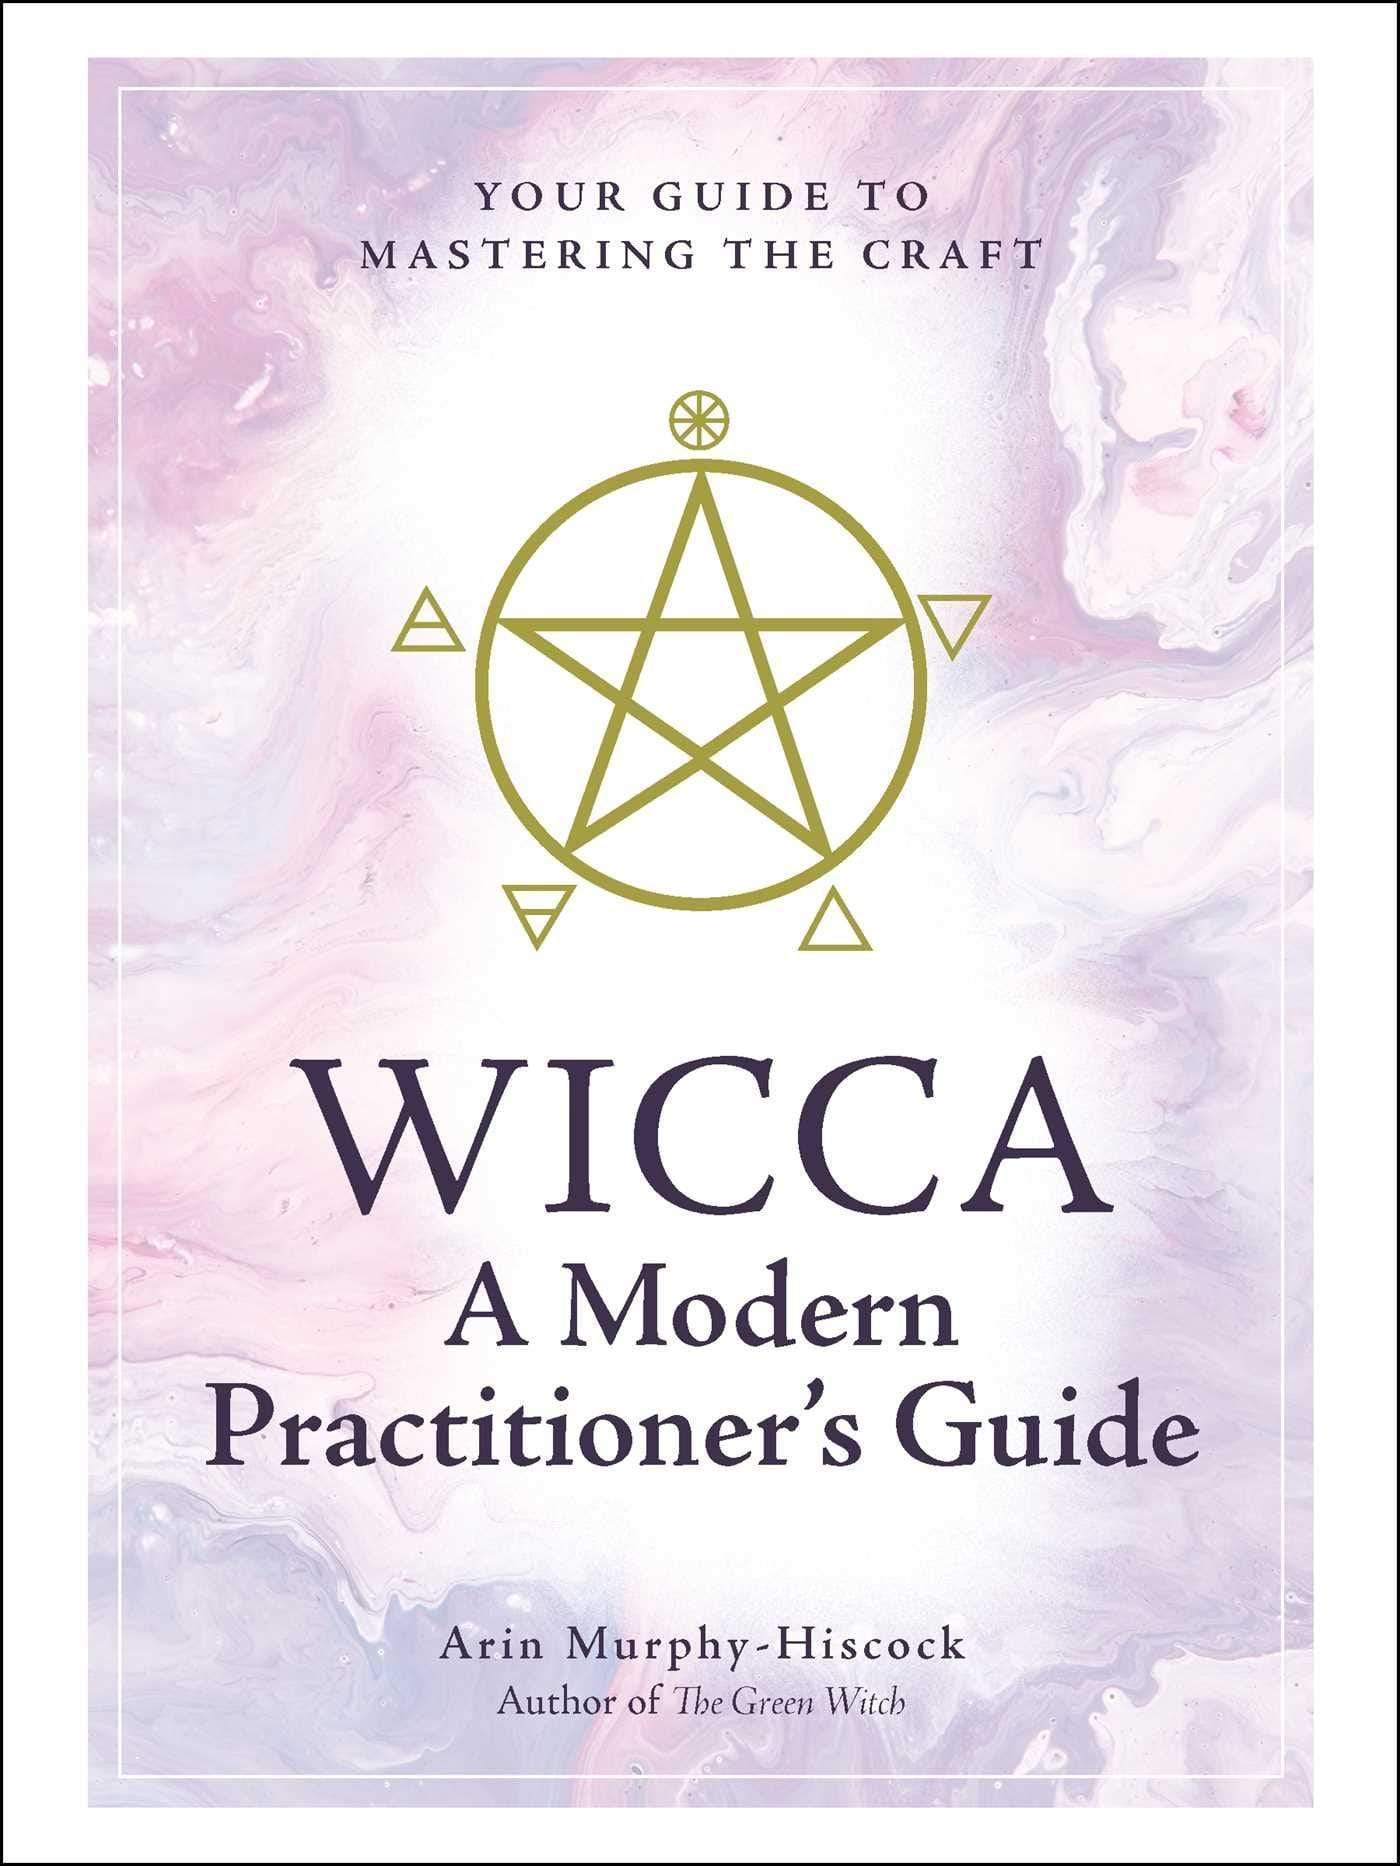 Wicca Modern Practioner's Guide by Arin Murphy-Hiscock